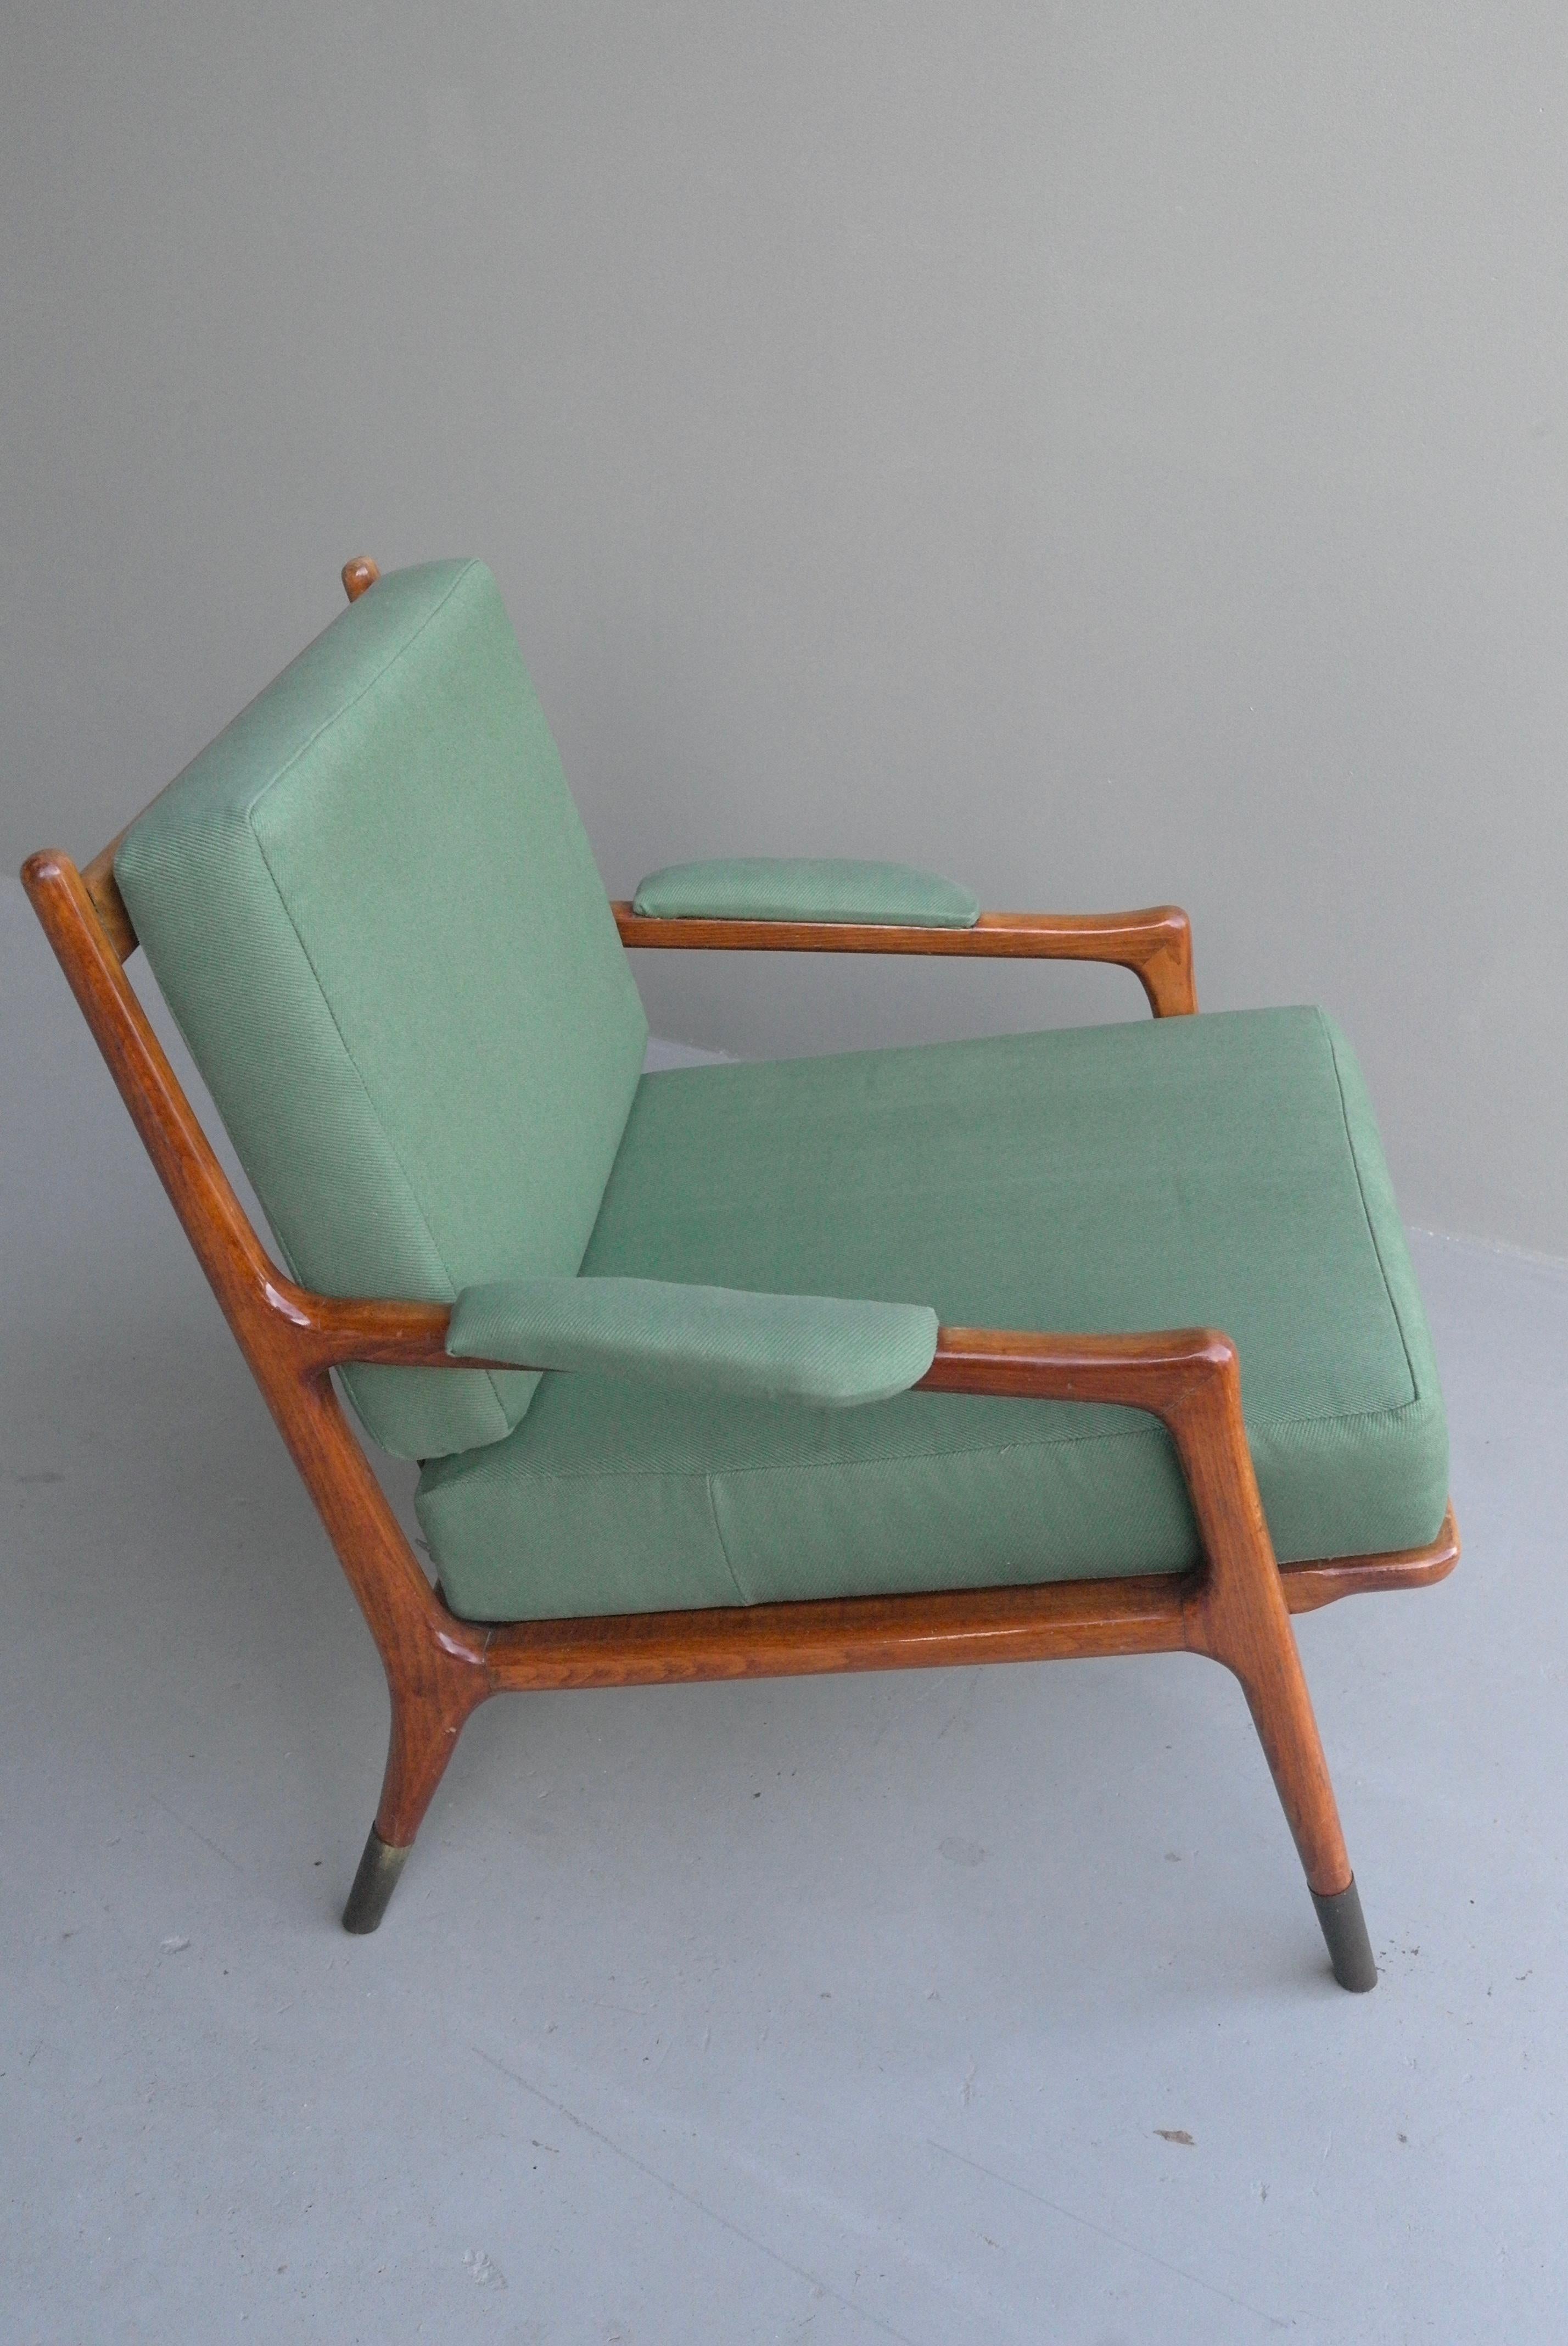 Wood Gio Ponti Style Lounge Chair, Fine Brass Feet and Green Upholstery, Italy, 1955 For Sale